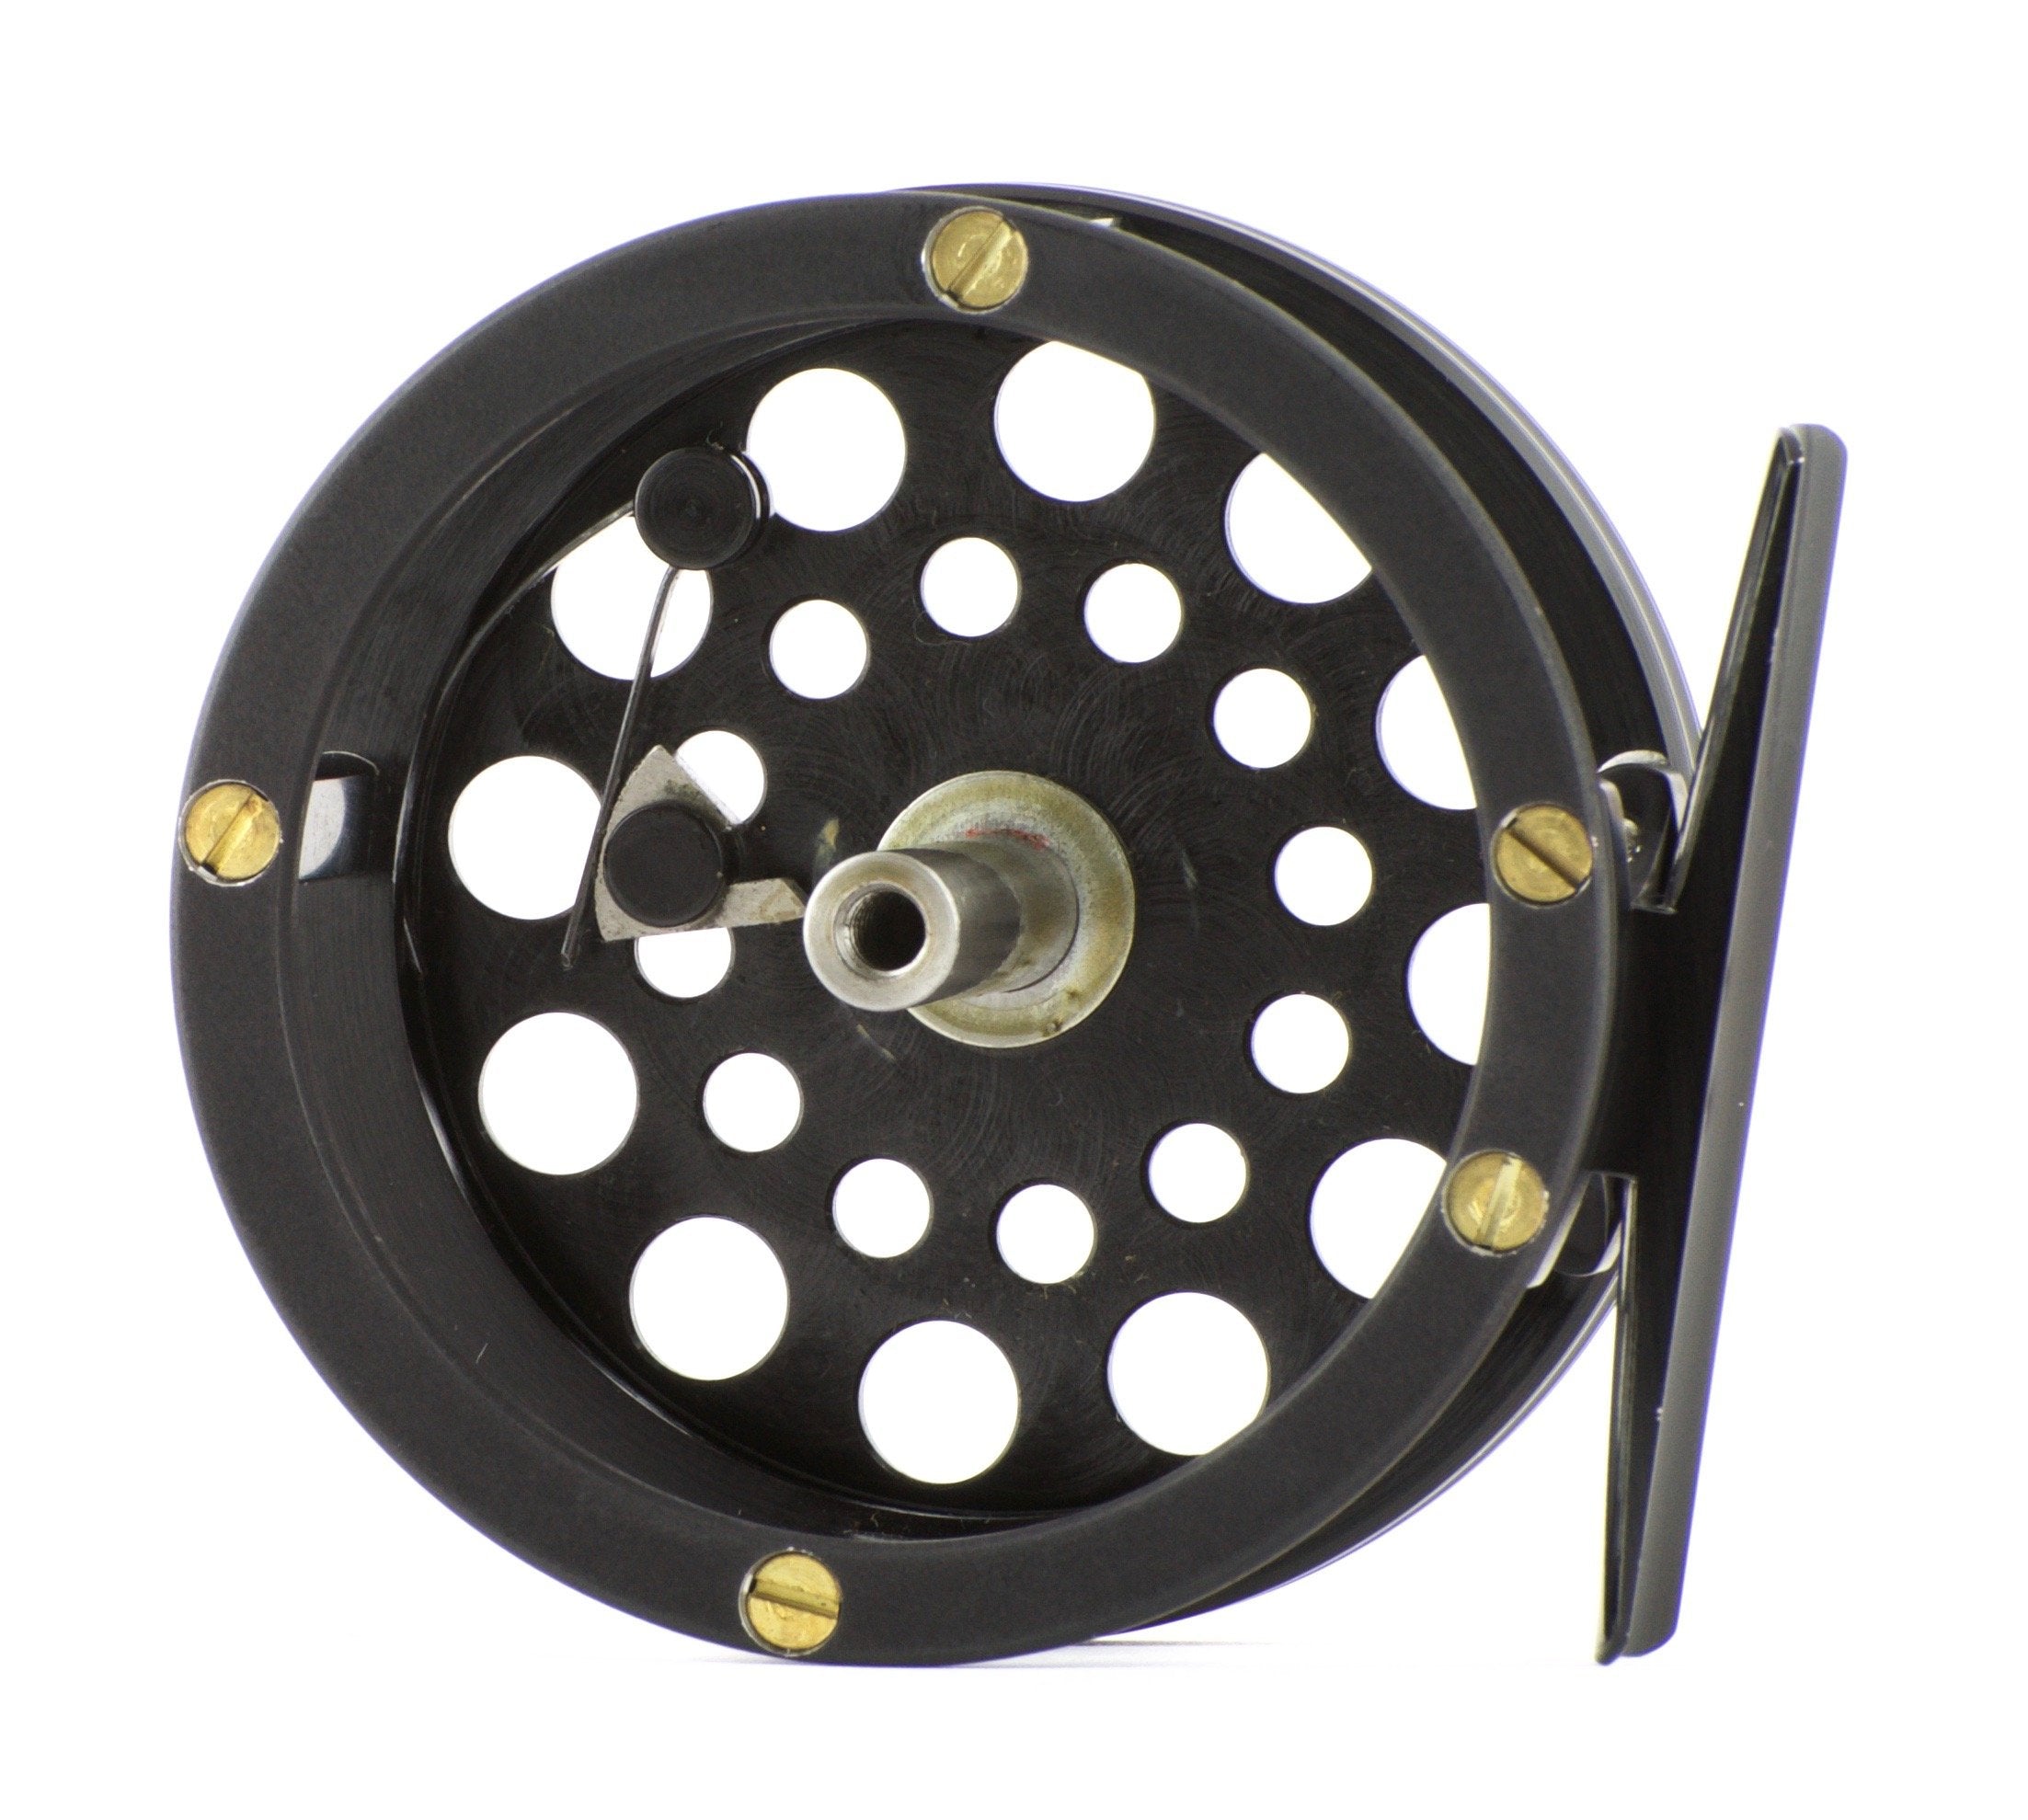 The hunt is finally over, Classic Fly Reels